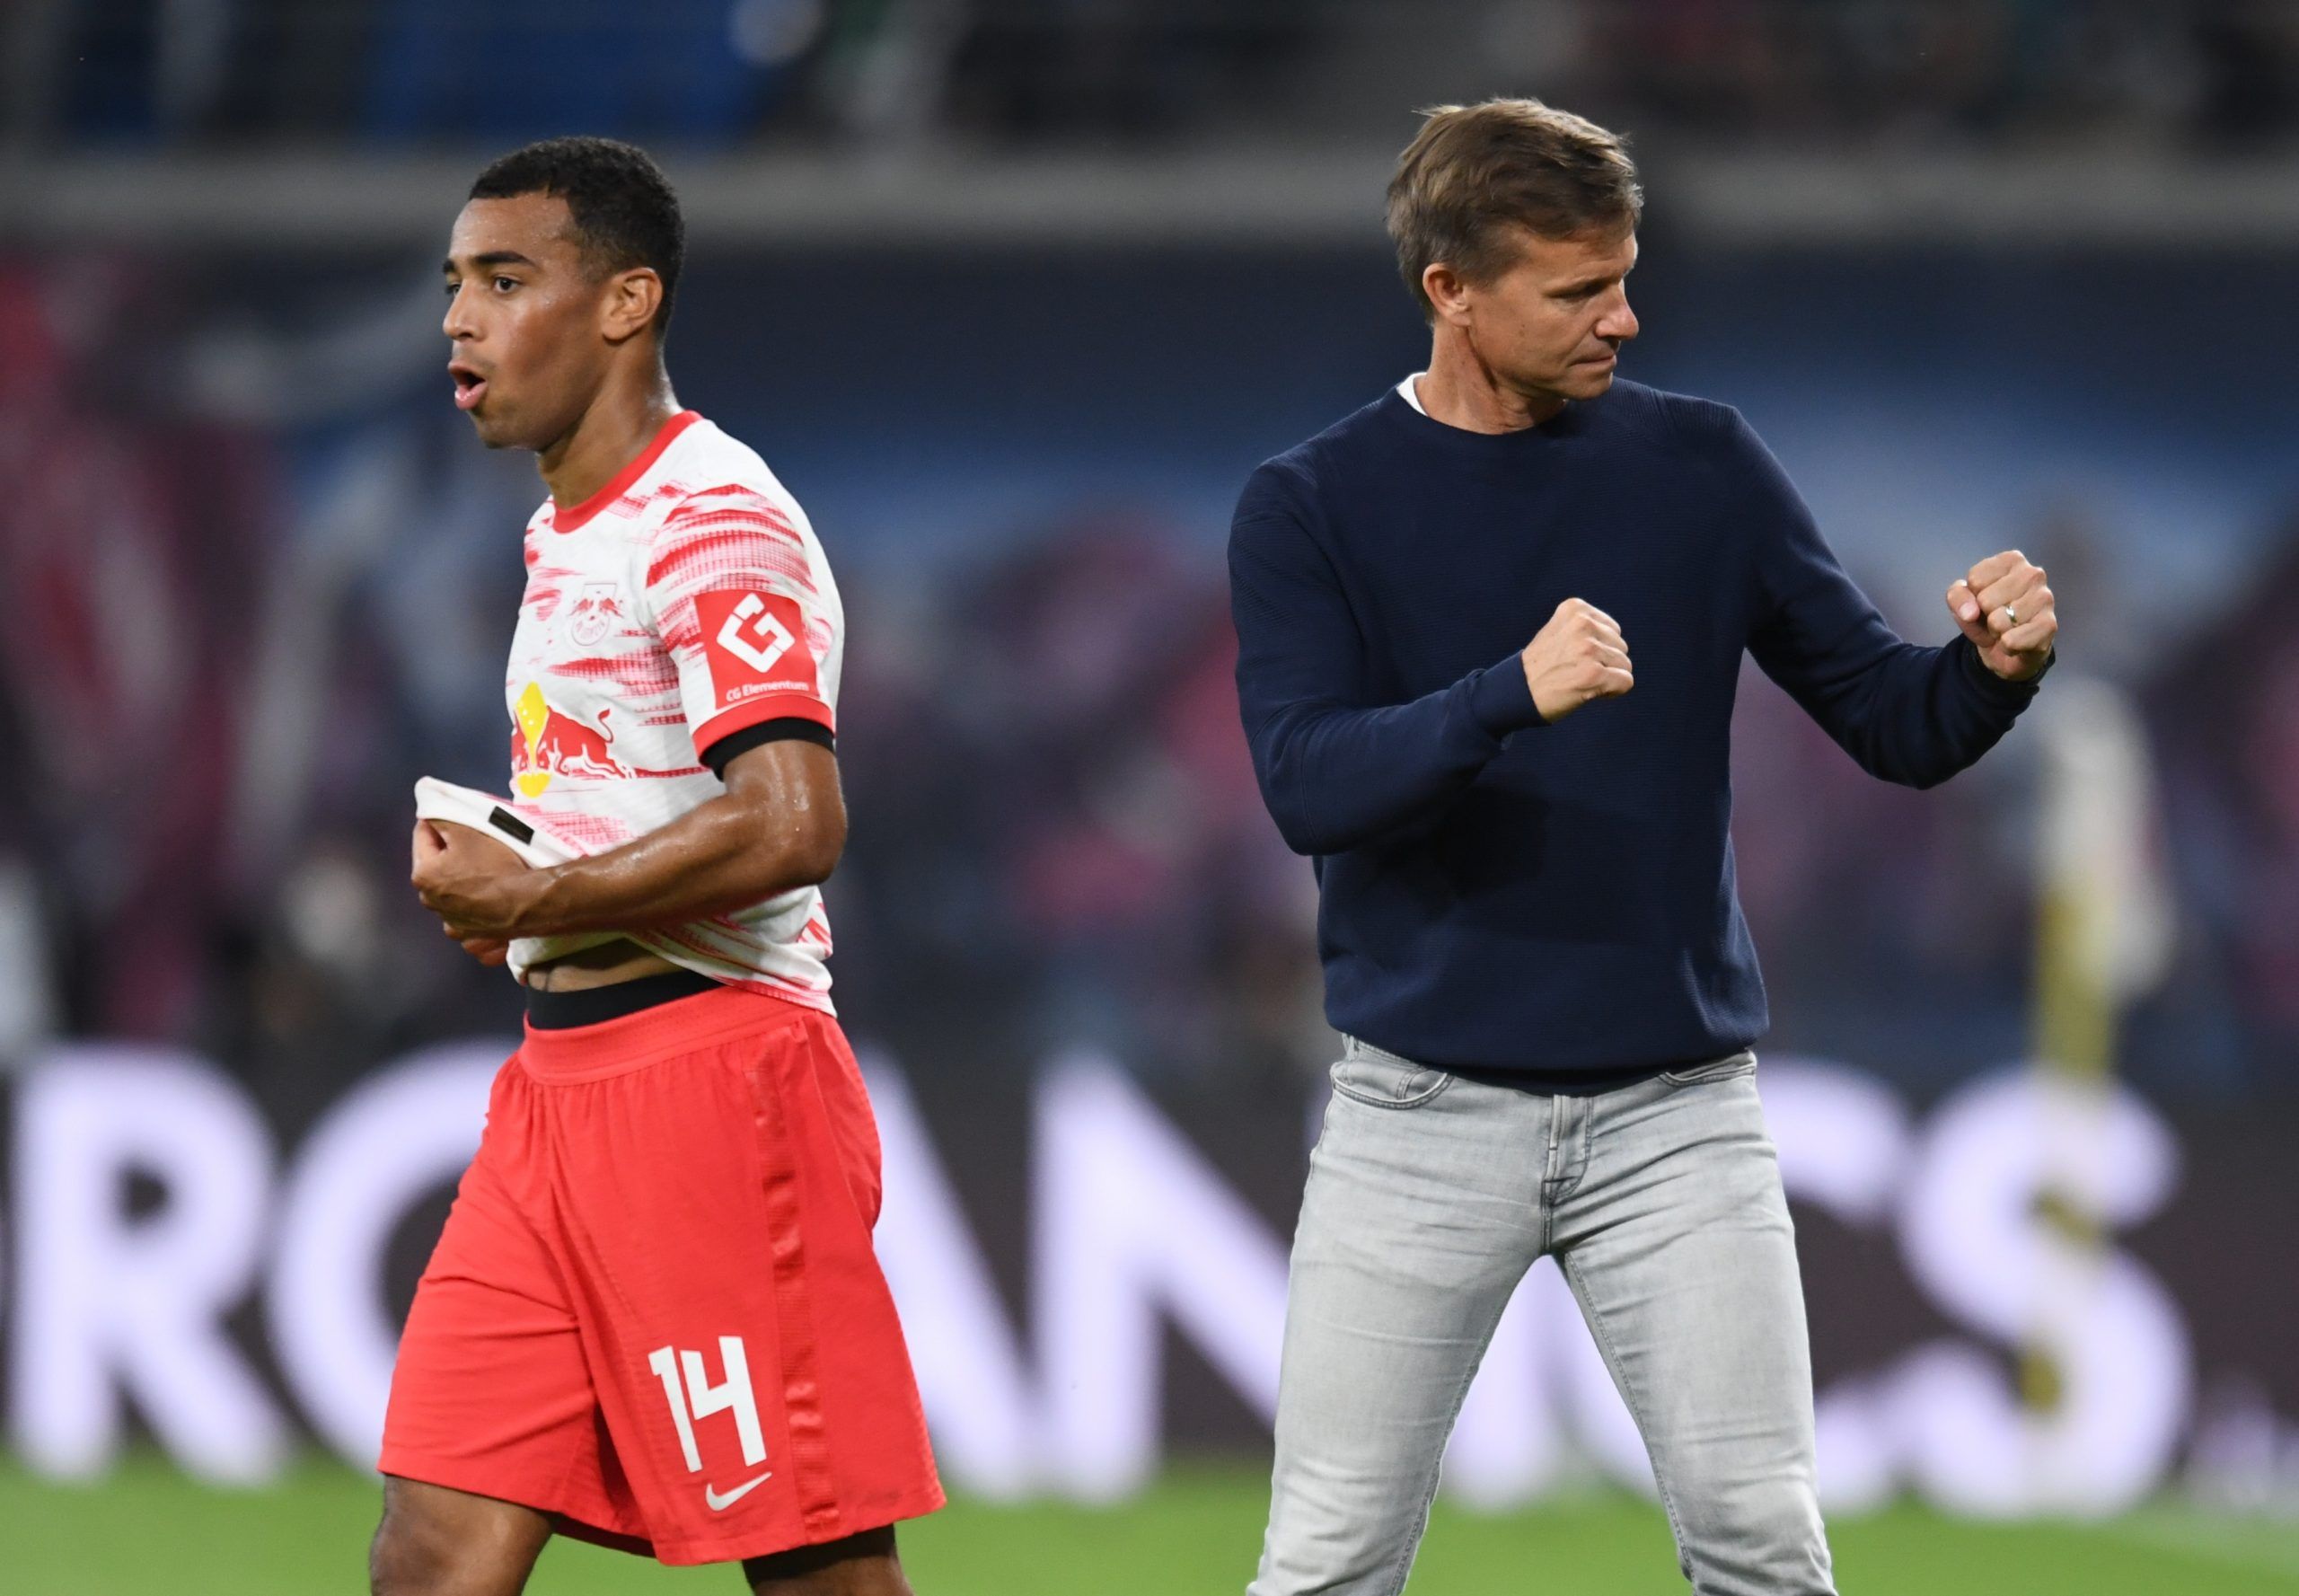 Soccer Football - Bundesliga - RB Leipzig v VfB Stuttgart - Red Bull Arena, Leipzig, Germany - August 20, 2021. RB Leipzig's Tyler Adams reacts and RB Leipzig coach Jesse Marsch celebrates after the match REUTERS/Annegret Hilse DFL regulations prohibit any use of photographs as image sequences and/or quasi-video.